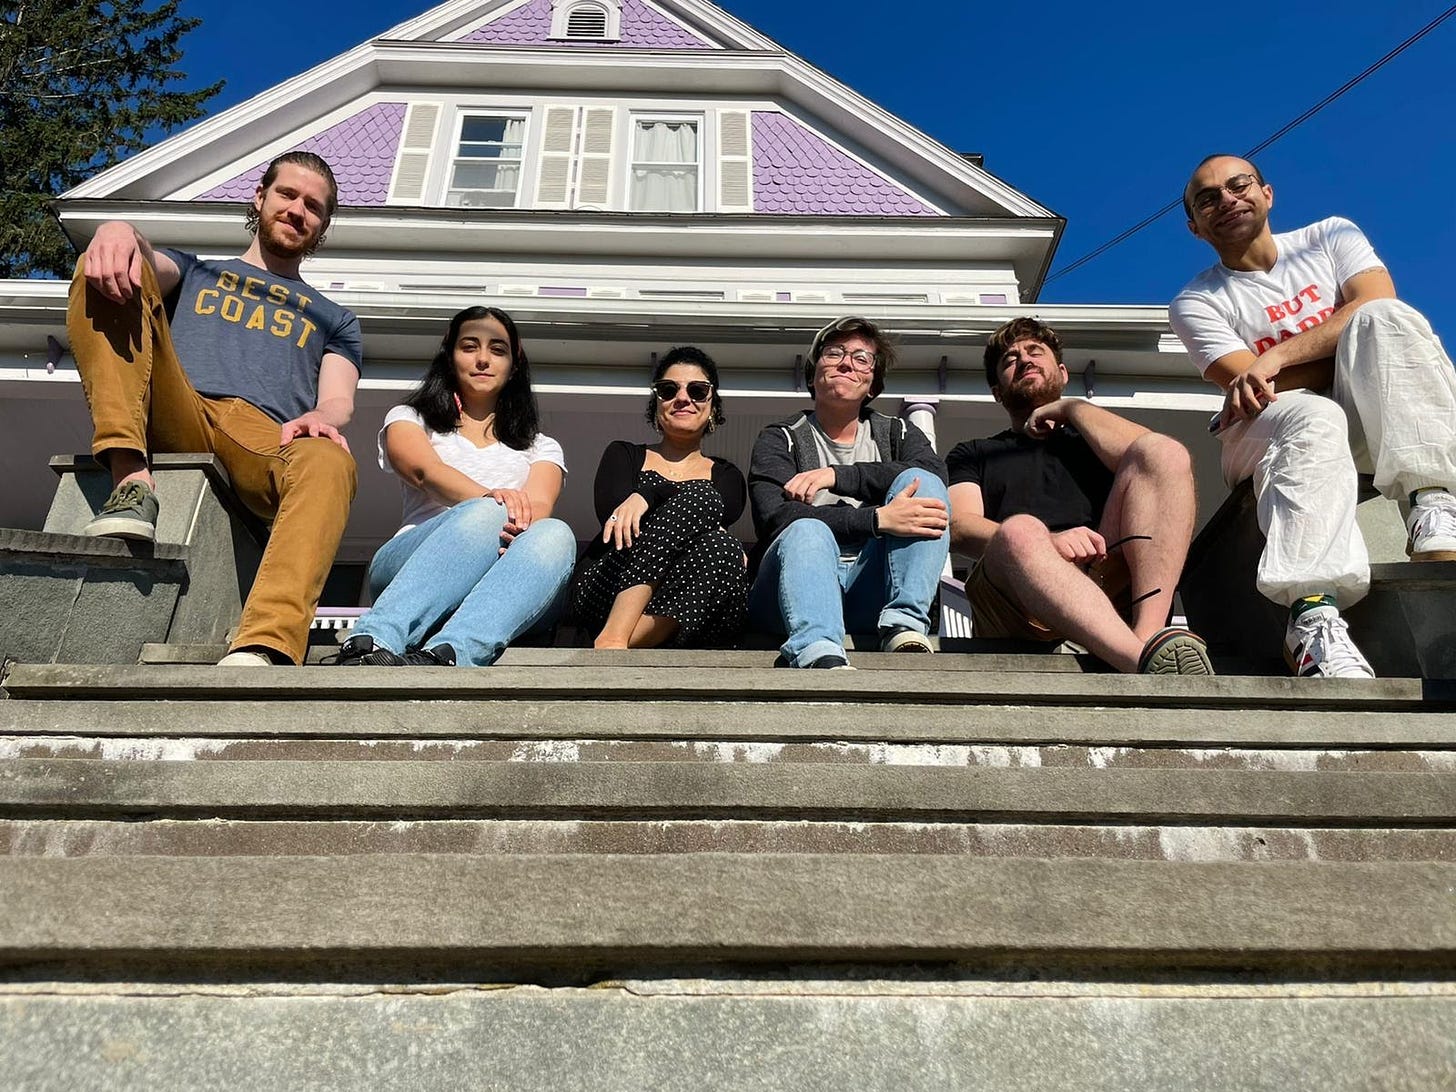 Six young people sit on the stairs of a three story purple house, looking down at the camera